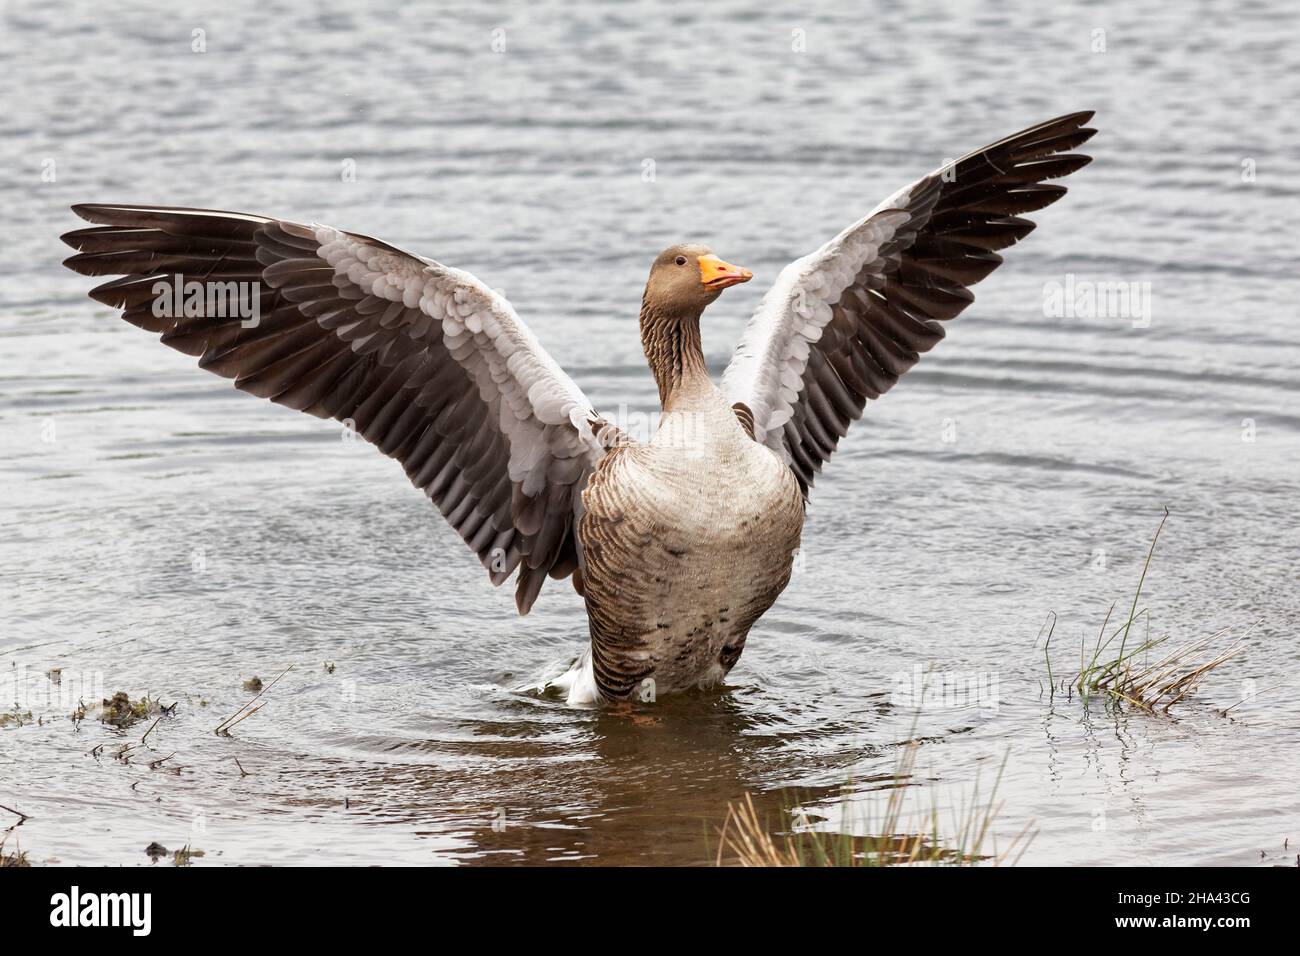 Greylag goose standing in a lake flapping his wings. Stock Photo